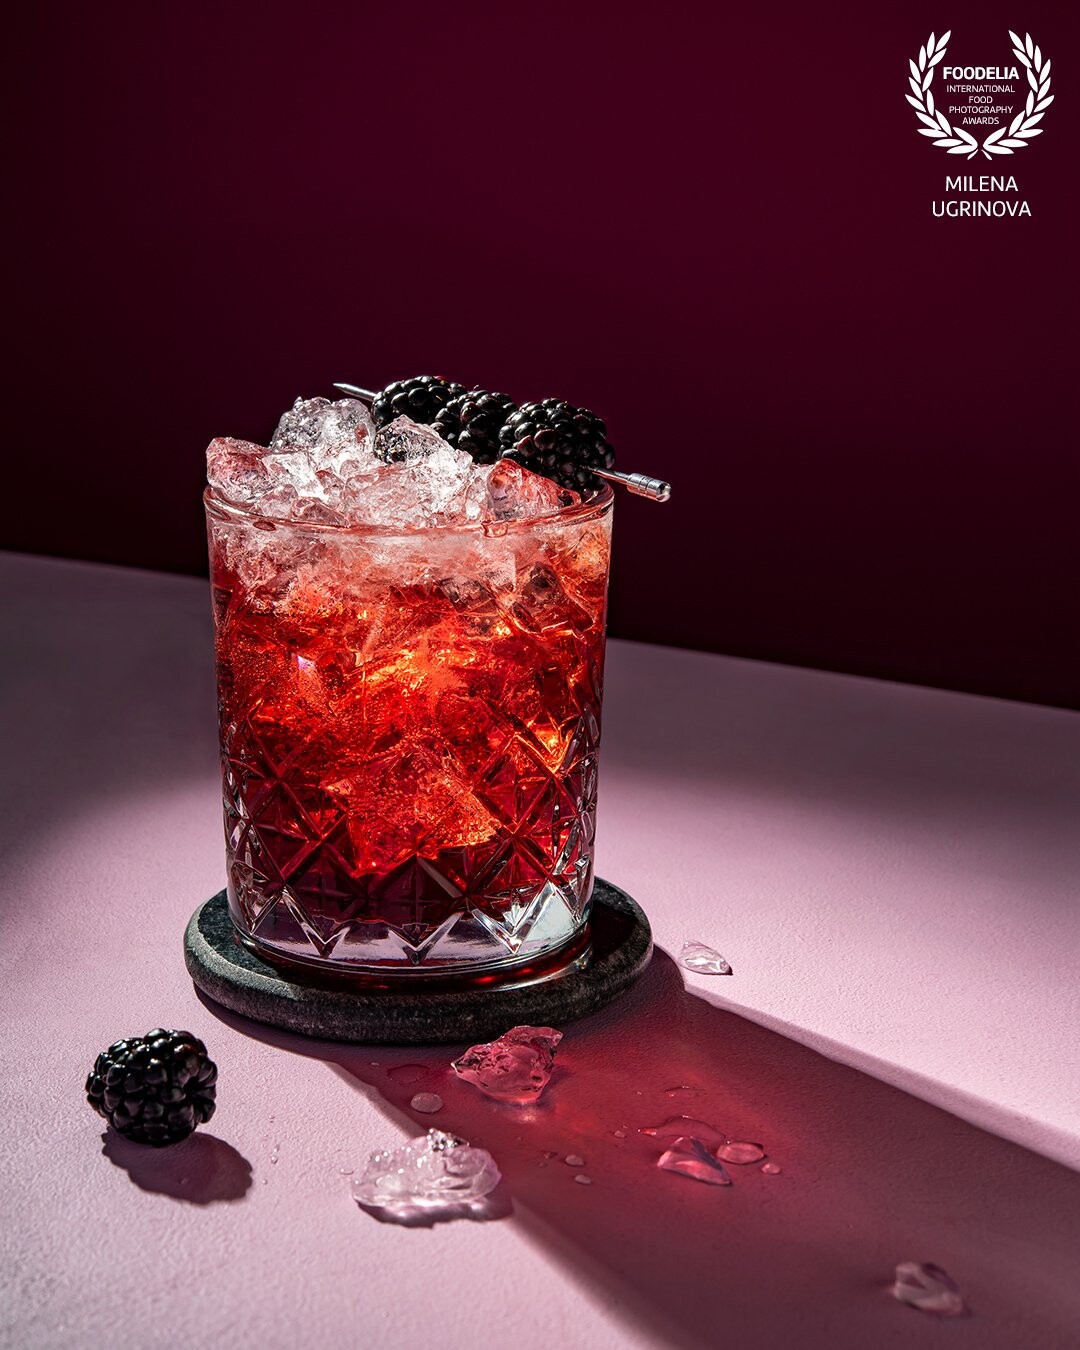 Blackberry Bramble is a very passionate cocktail to bring you up. Its flame red is remarkable in combination with the ice-cold.<br />
<br />
The photo is being a deep investigation into the light and the semi-transparent character of the ice-filled drink. It is created with a single light source, a small 7" standard reflector and a honeycomb.